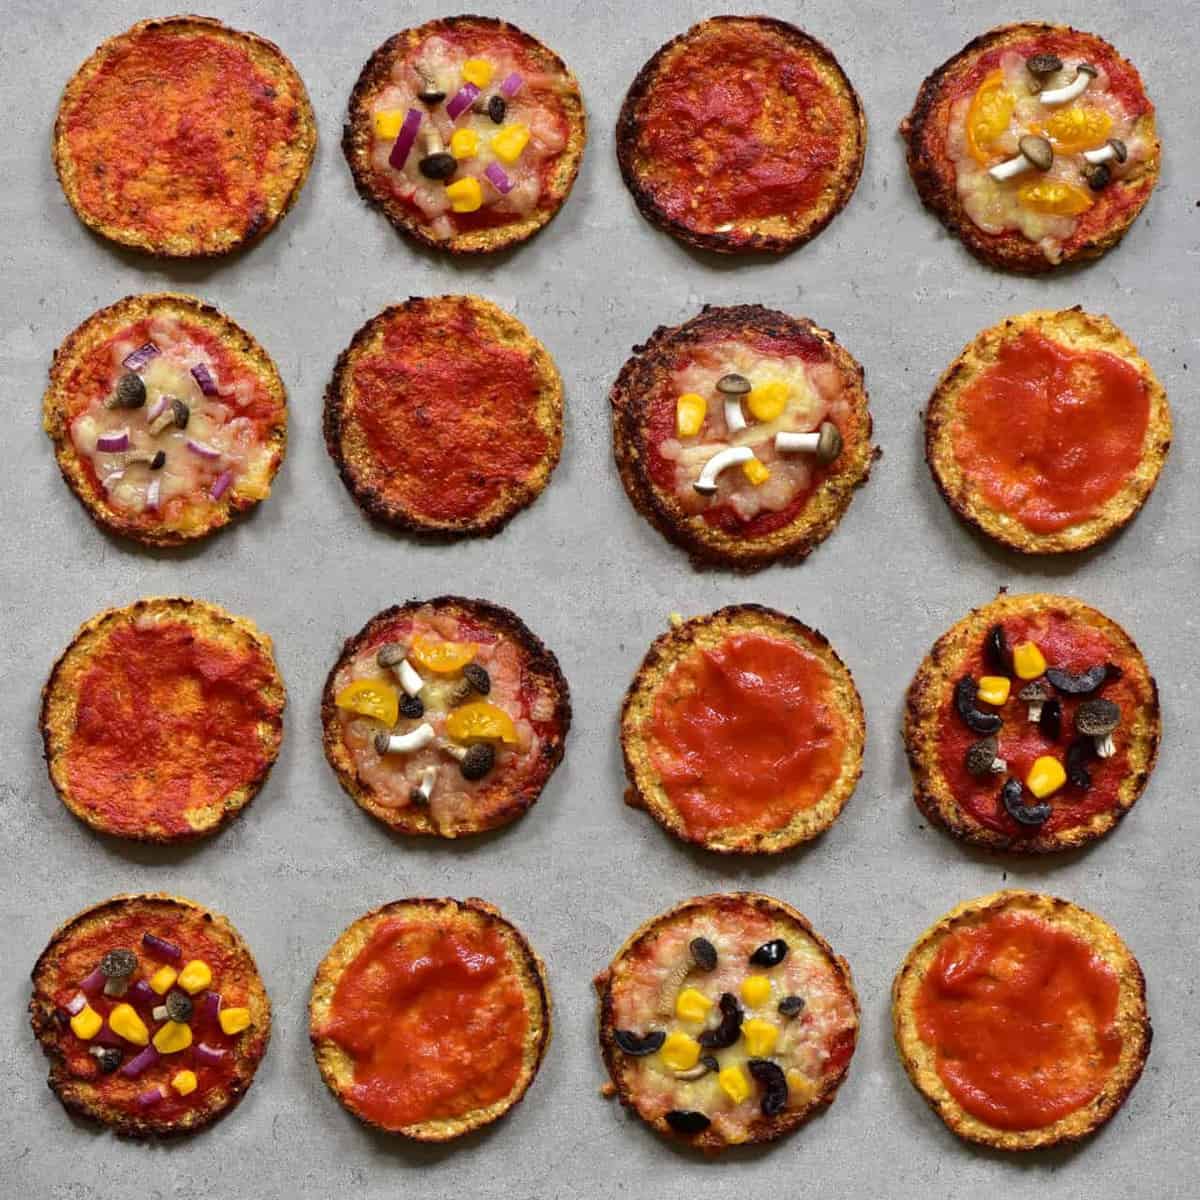 Baked mimi pizzas topped with tomato sauce and some with cheese corn and mushrooms